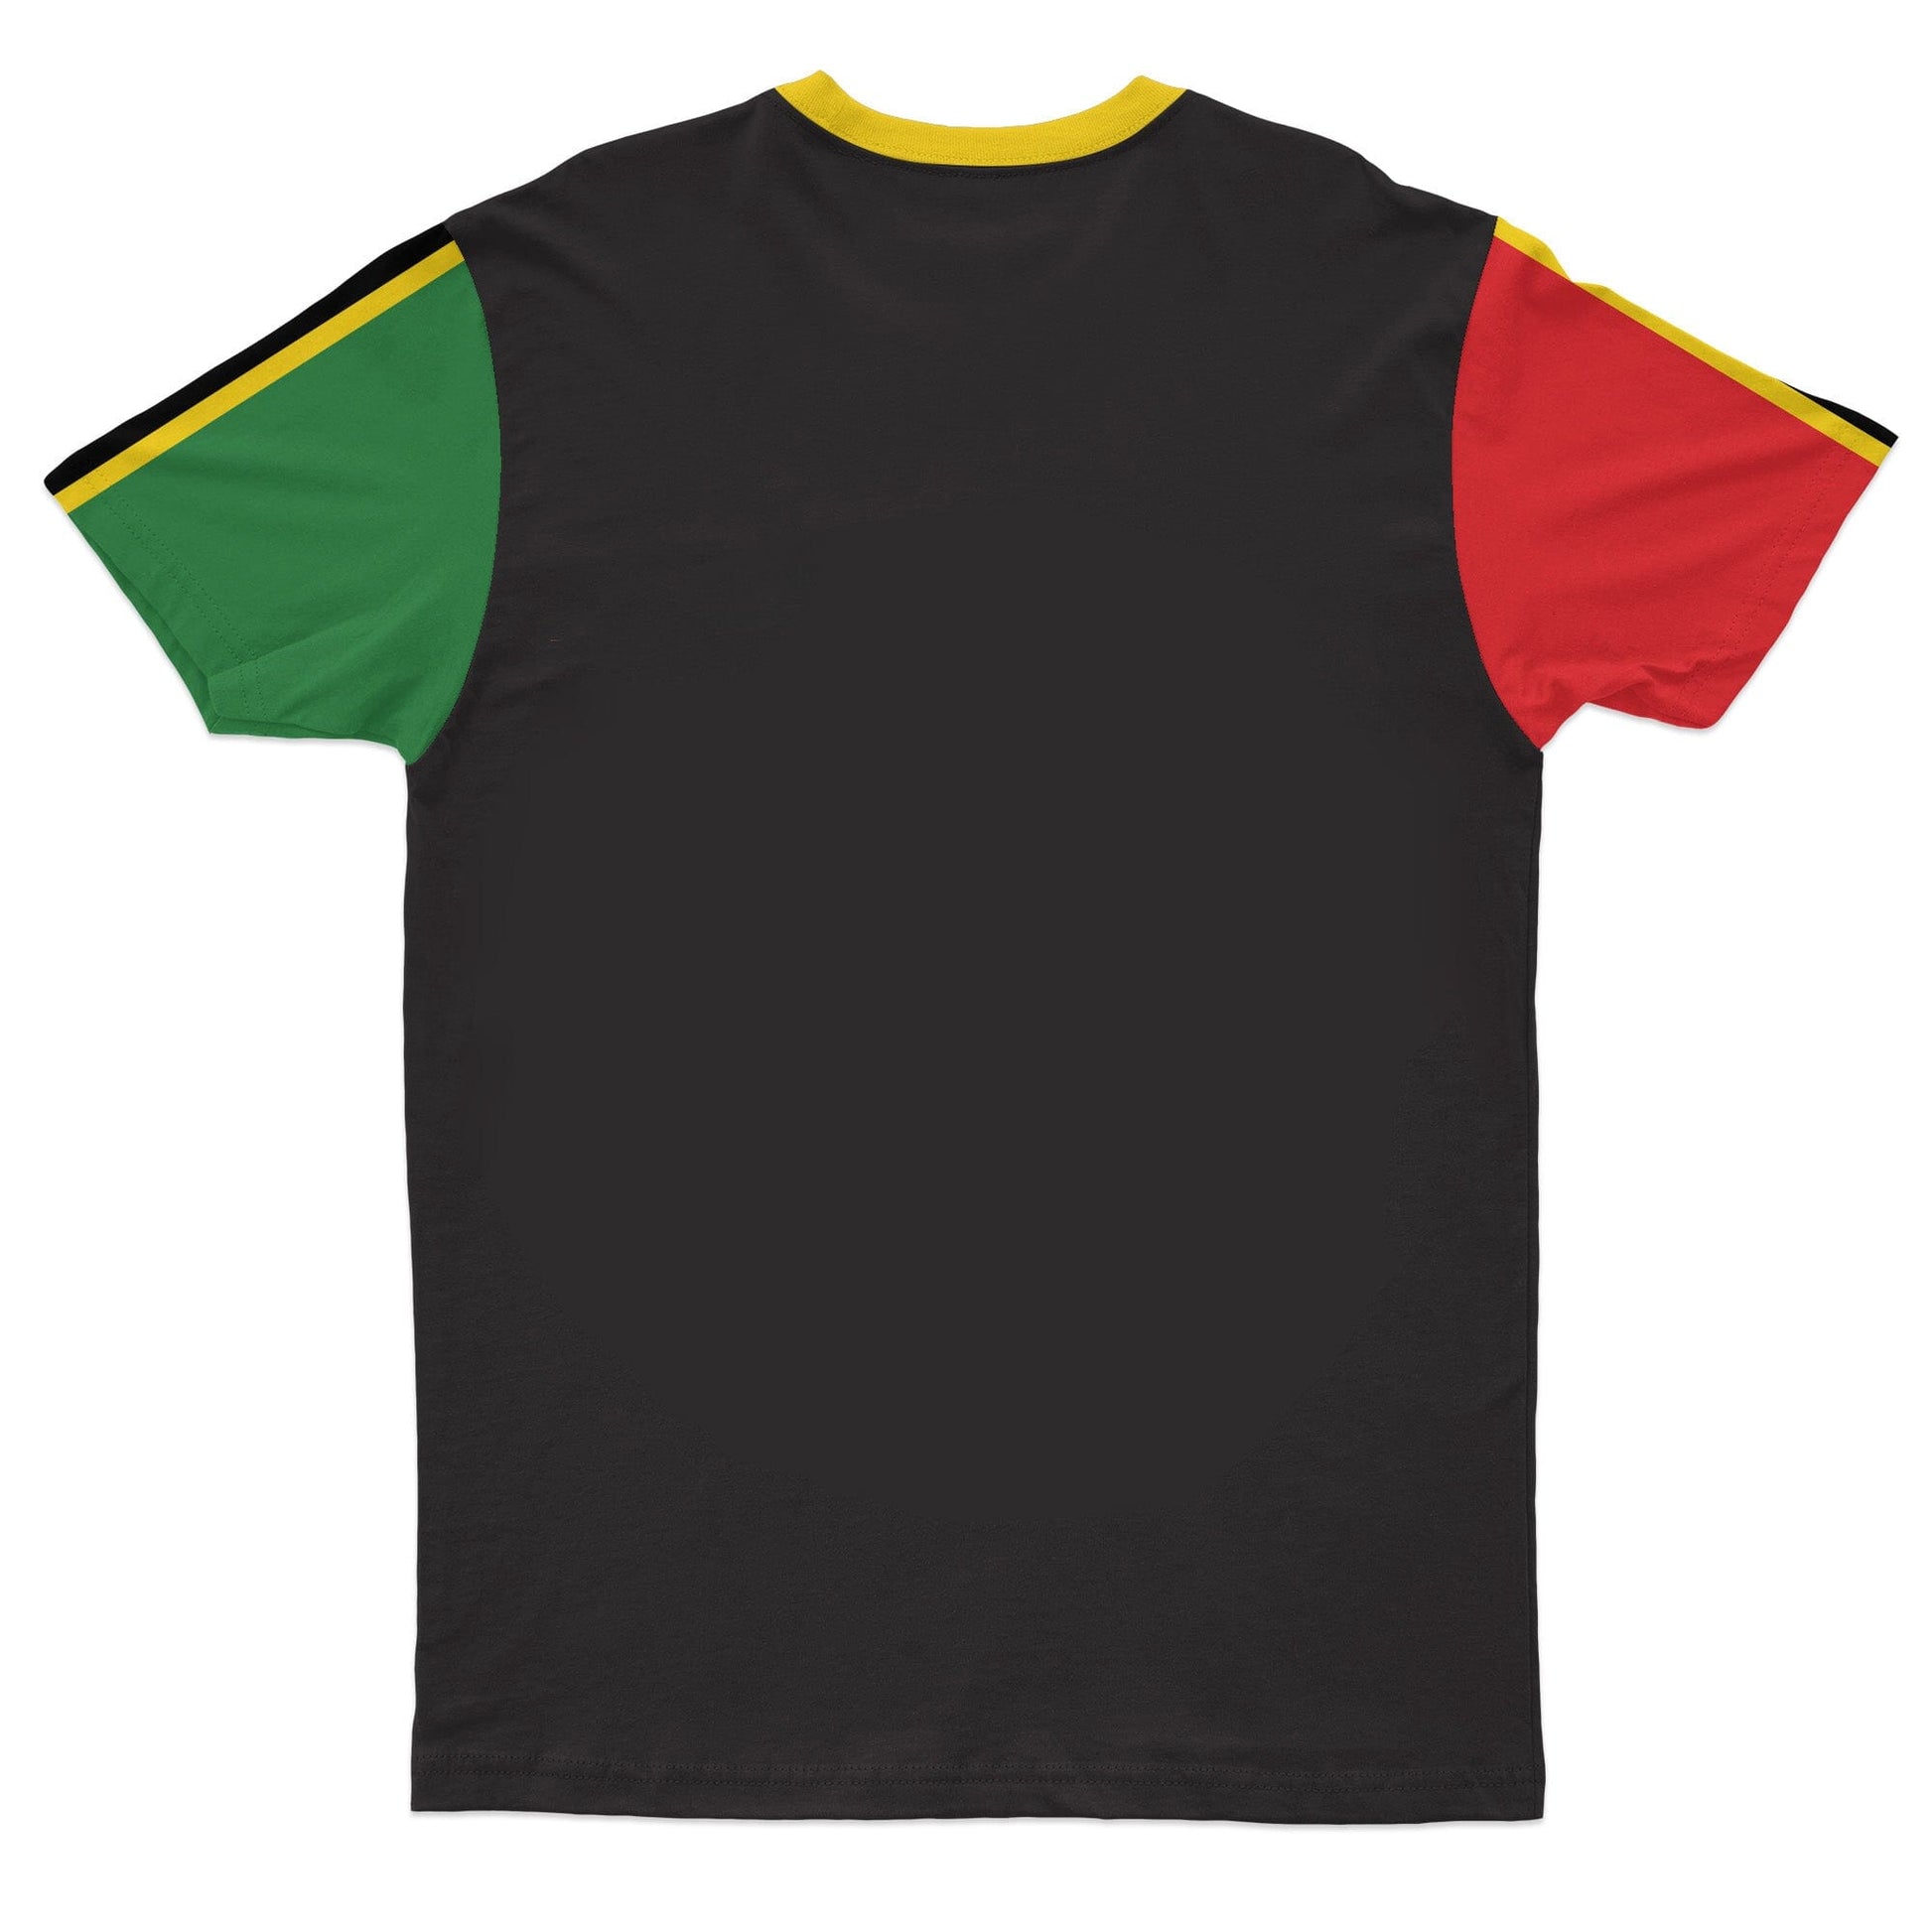 Black History Month Facts T-Shirt AOP Tee Tianci 